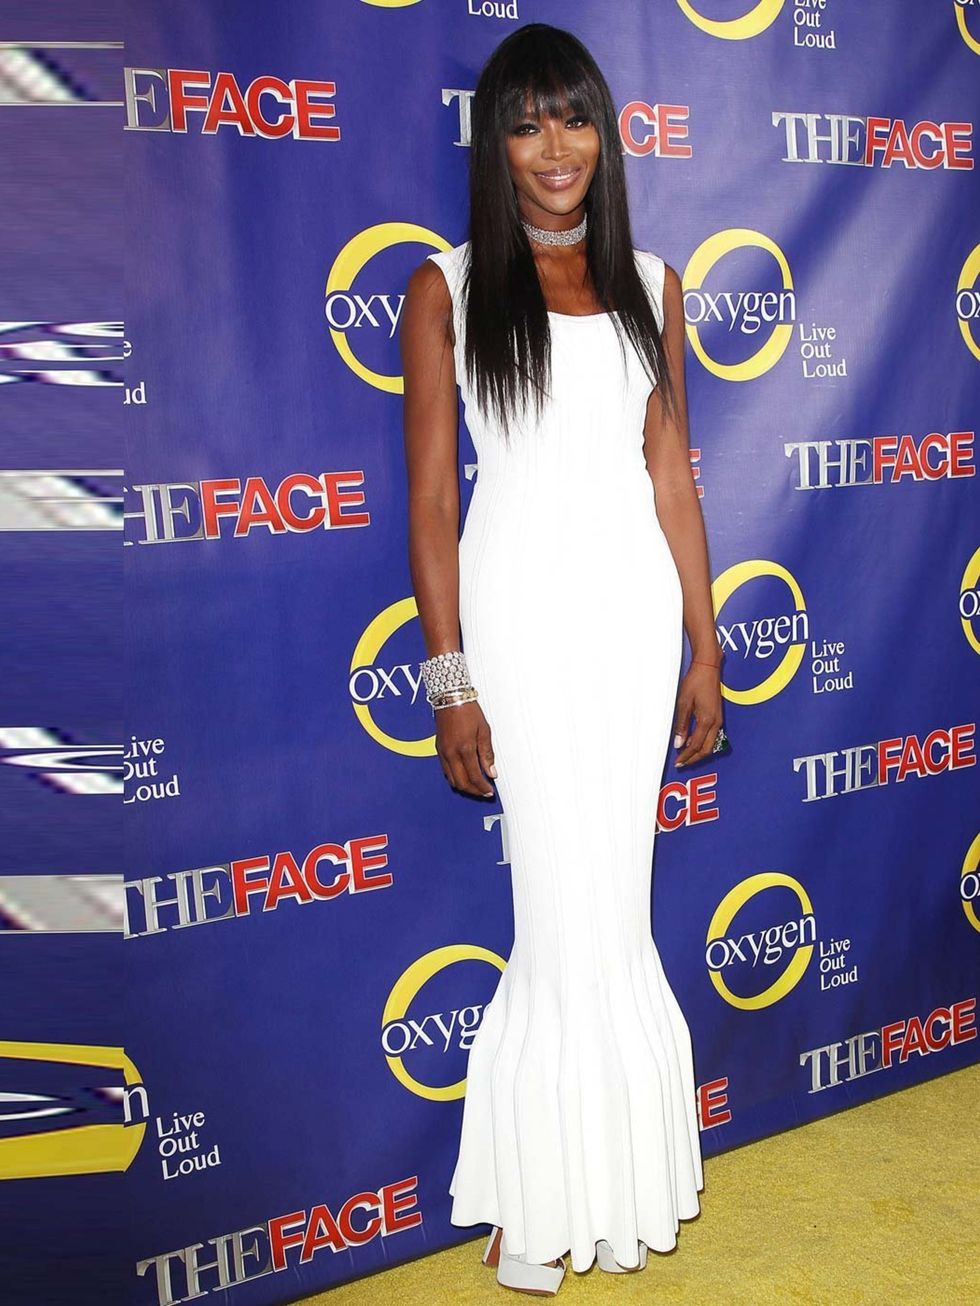 <p><strong>The Gown</strong></p><p><a href="http://www.elleuk.com/star-style/celebrity-style-files/naomi-campbell">Naomi Campbell</a> wearing Azzedine Alaia to the 'The Face' TV series, New York, February 2013. </p><p><em><a href="http://www.elleuk.com/st